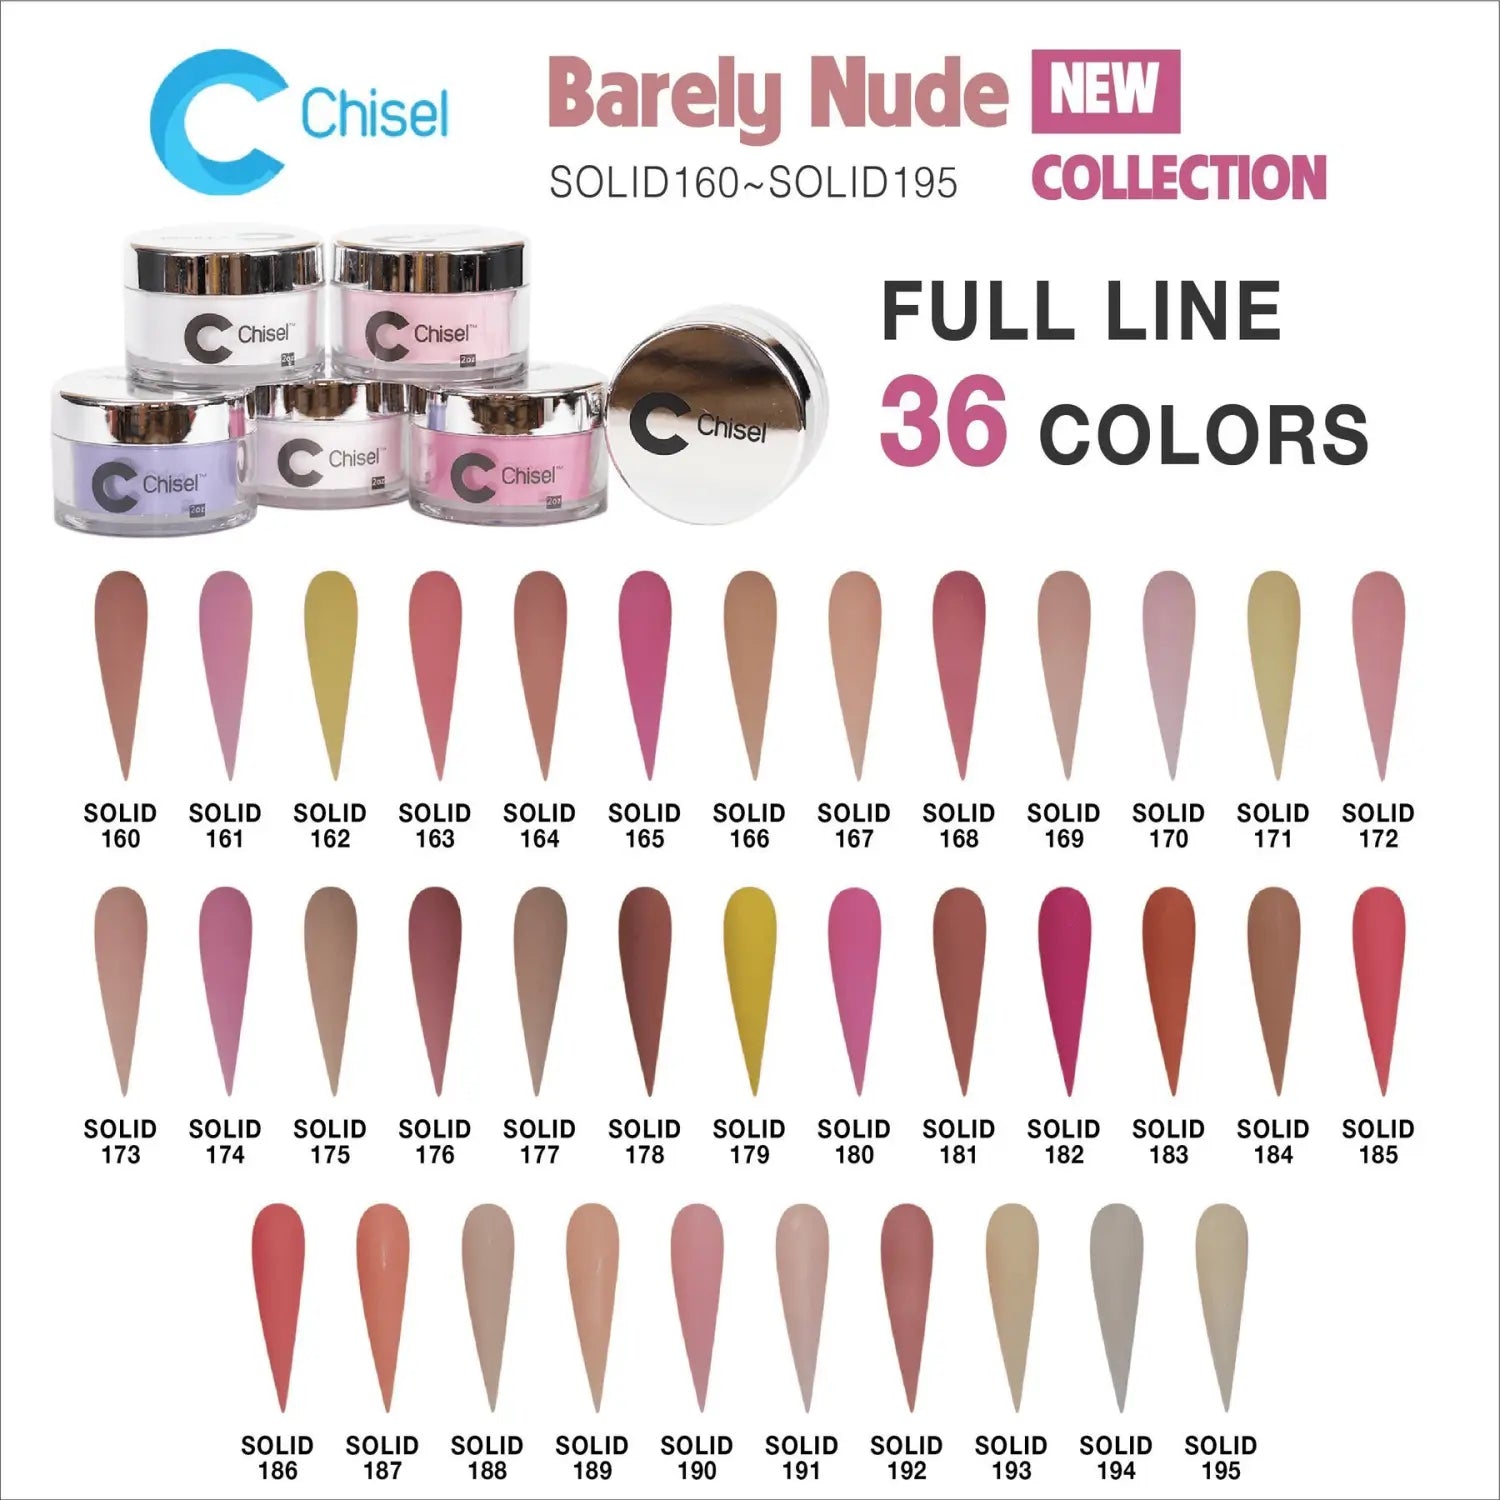 Chisel 2in1 Acrylic/Dipping Powder, (Barely Nude) Solid Collection, Full  Line Of 36 Colors (From SOLID160 To SOLID195), 2oz – Abc Nail Supply